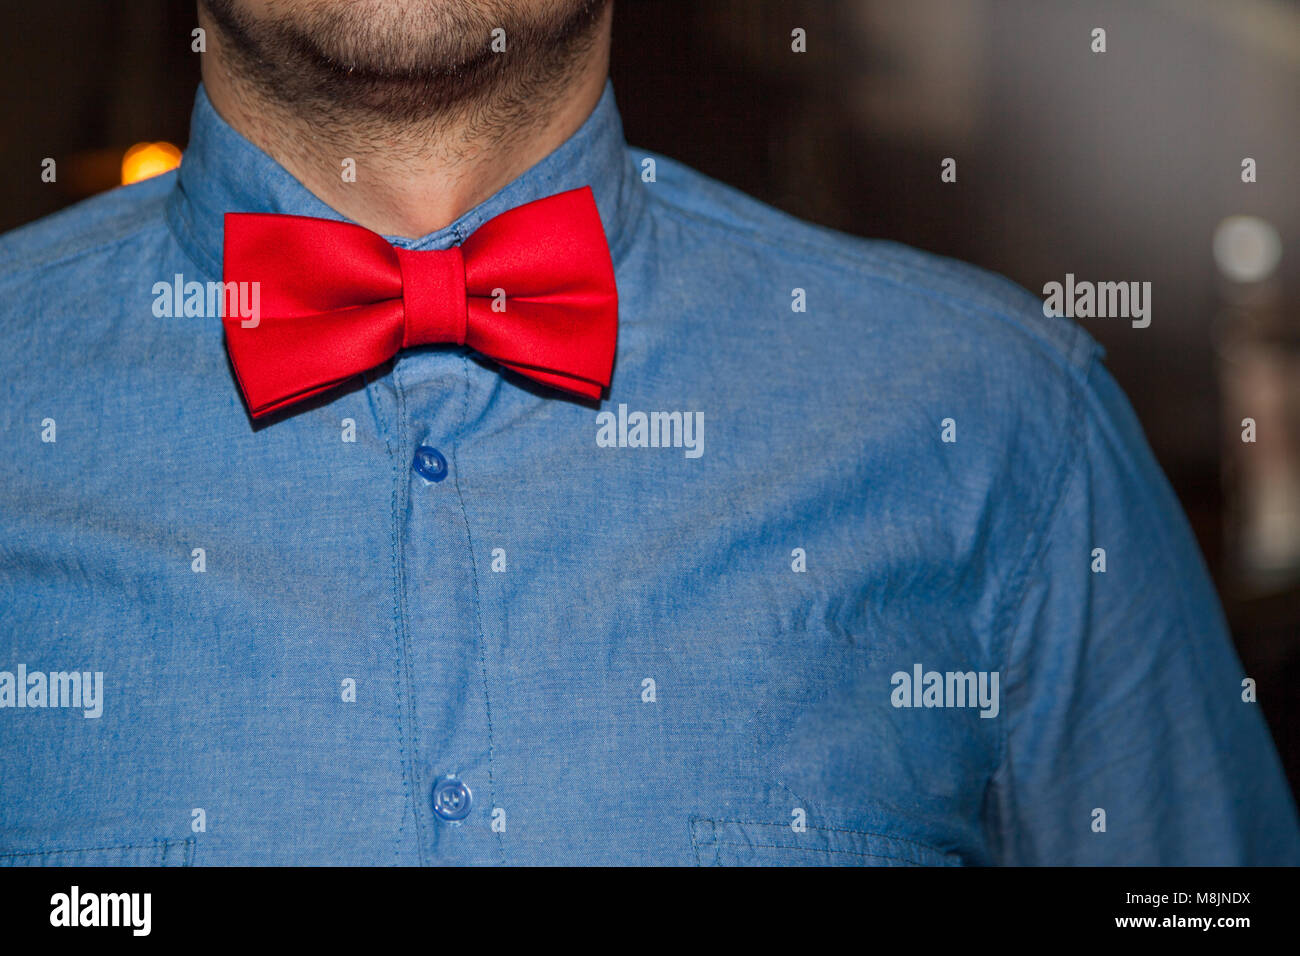 jean shirt with bow tie